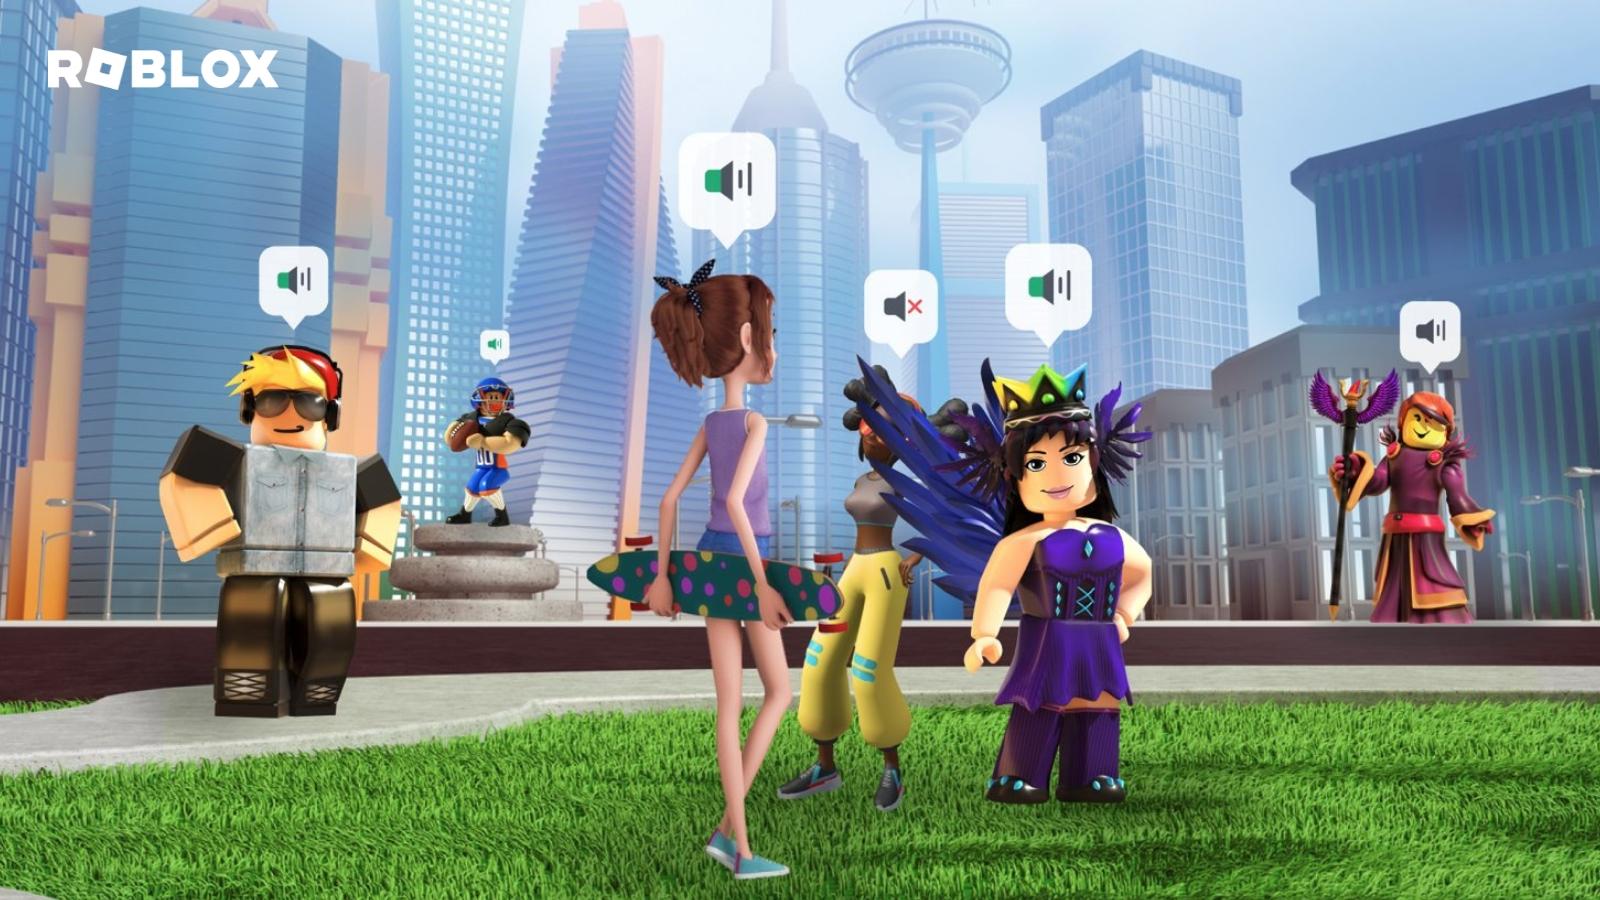 Roblox - Exciting news for mobile players. You can now chat with